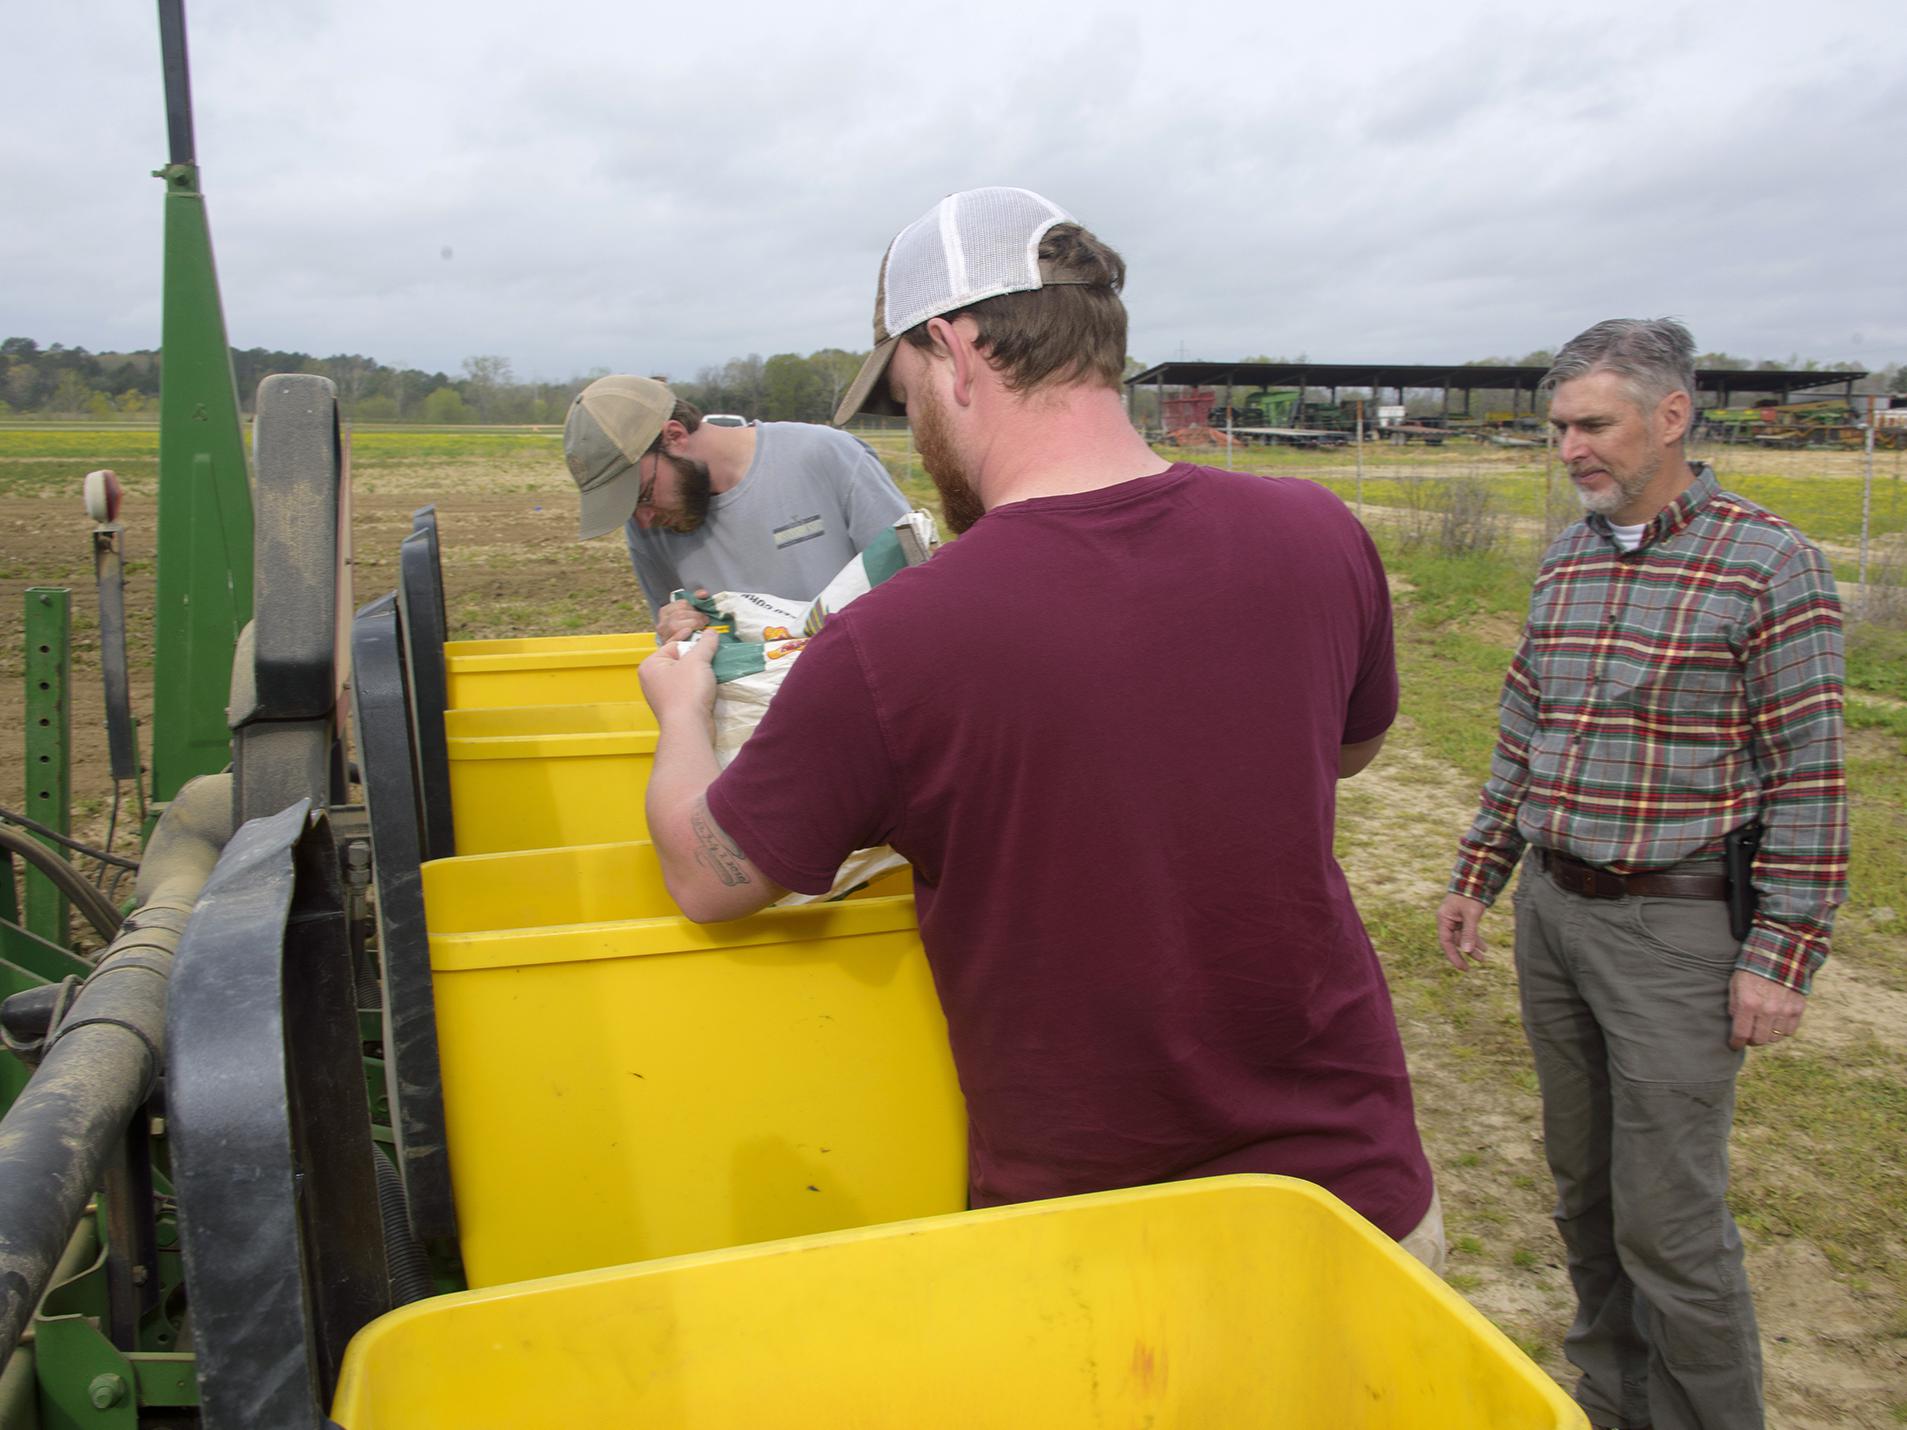 Two young men pour seed into bright yellow bins while a man watches.